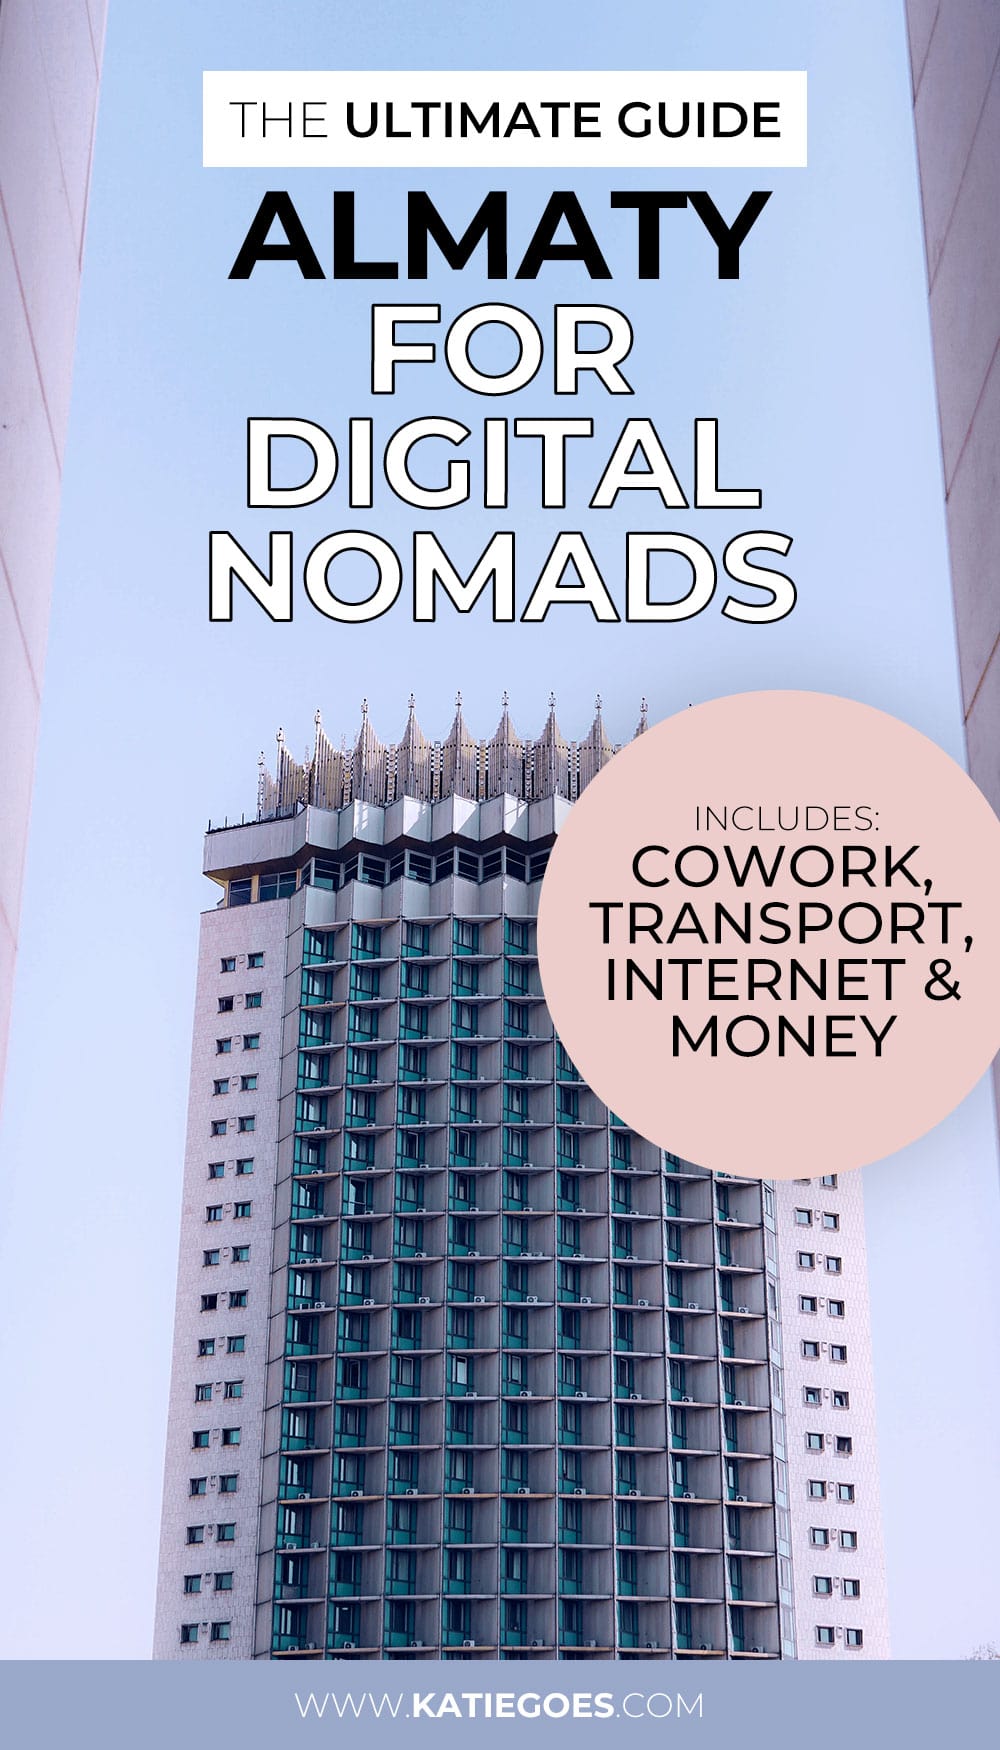 The Ultimate Guide - Almaty for Digital Nomads (Includes Cowork, Transport, Internet & Money)